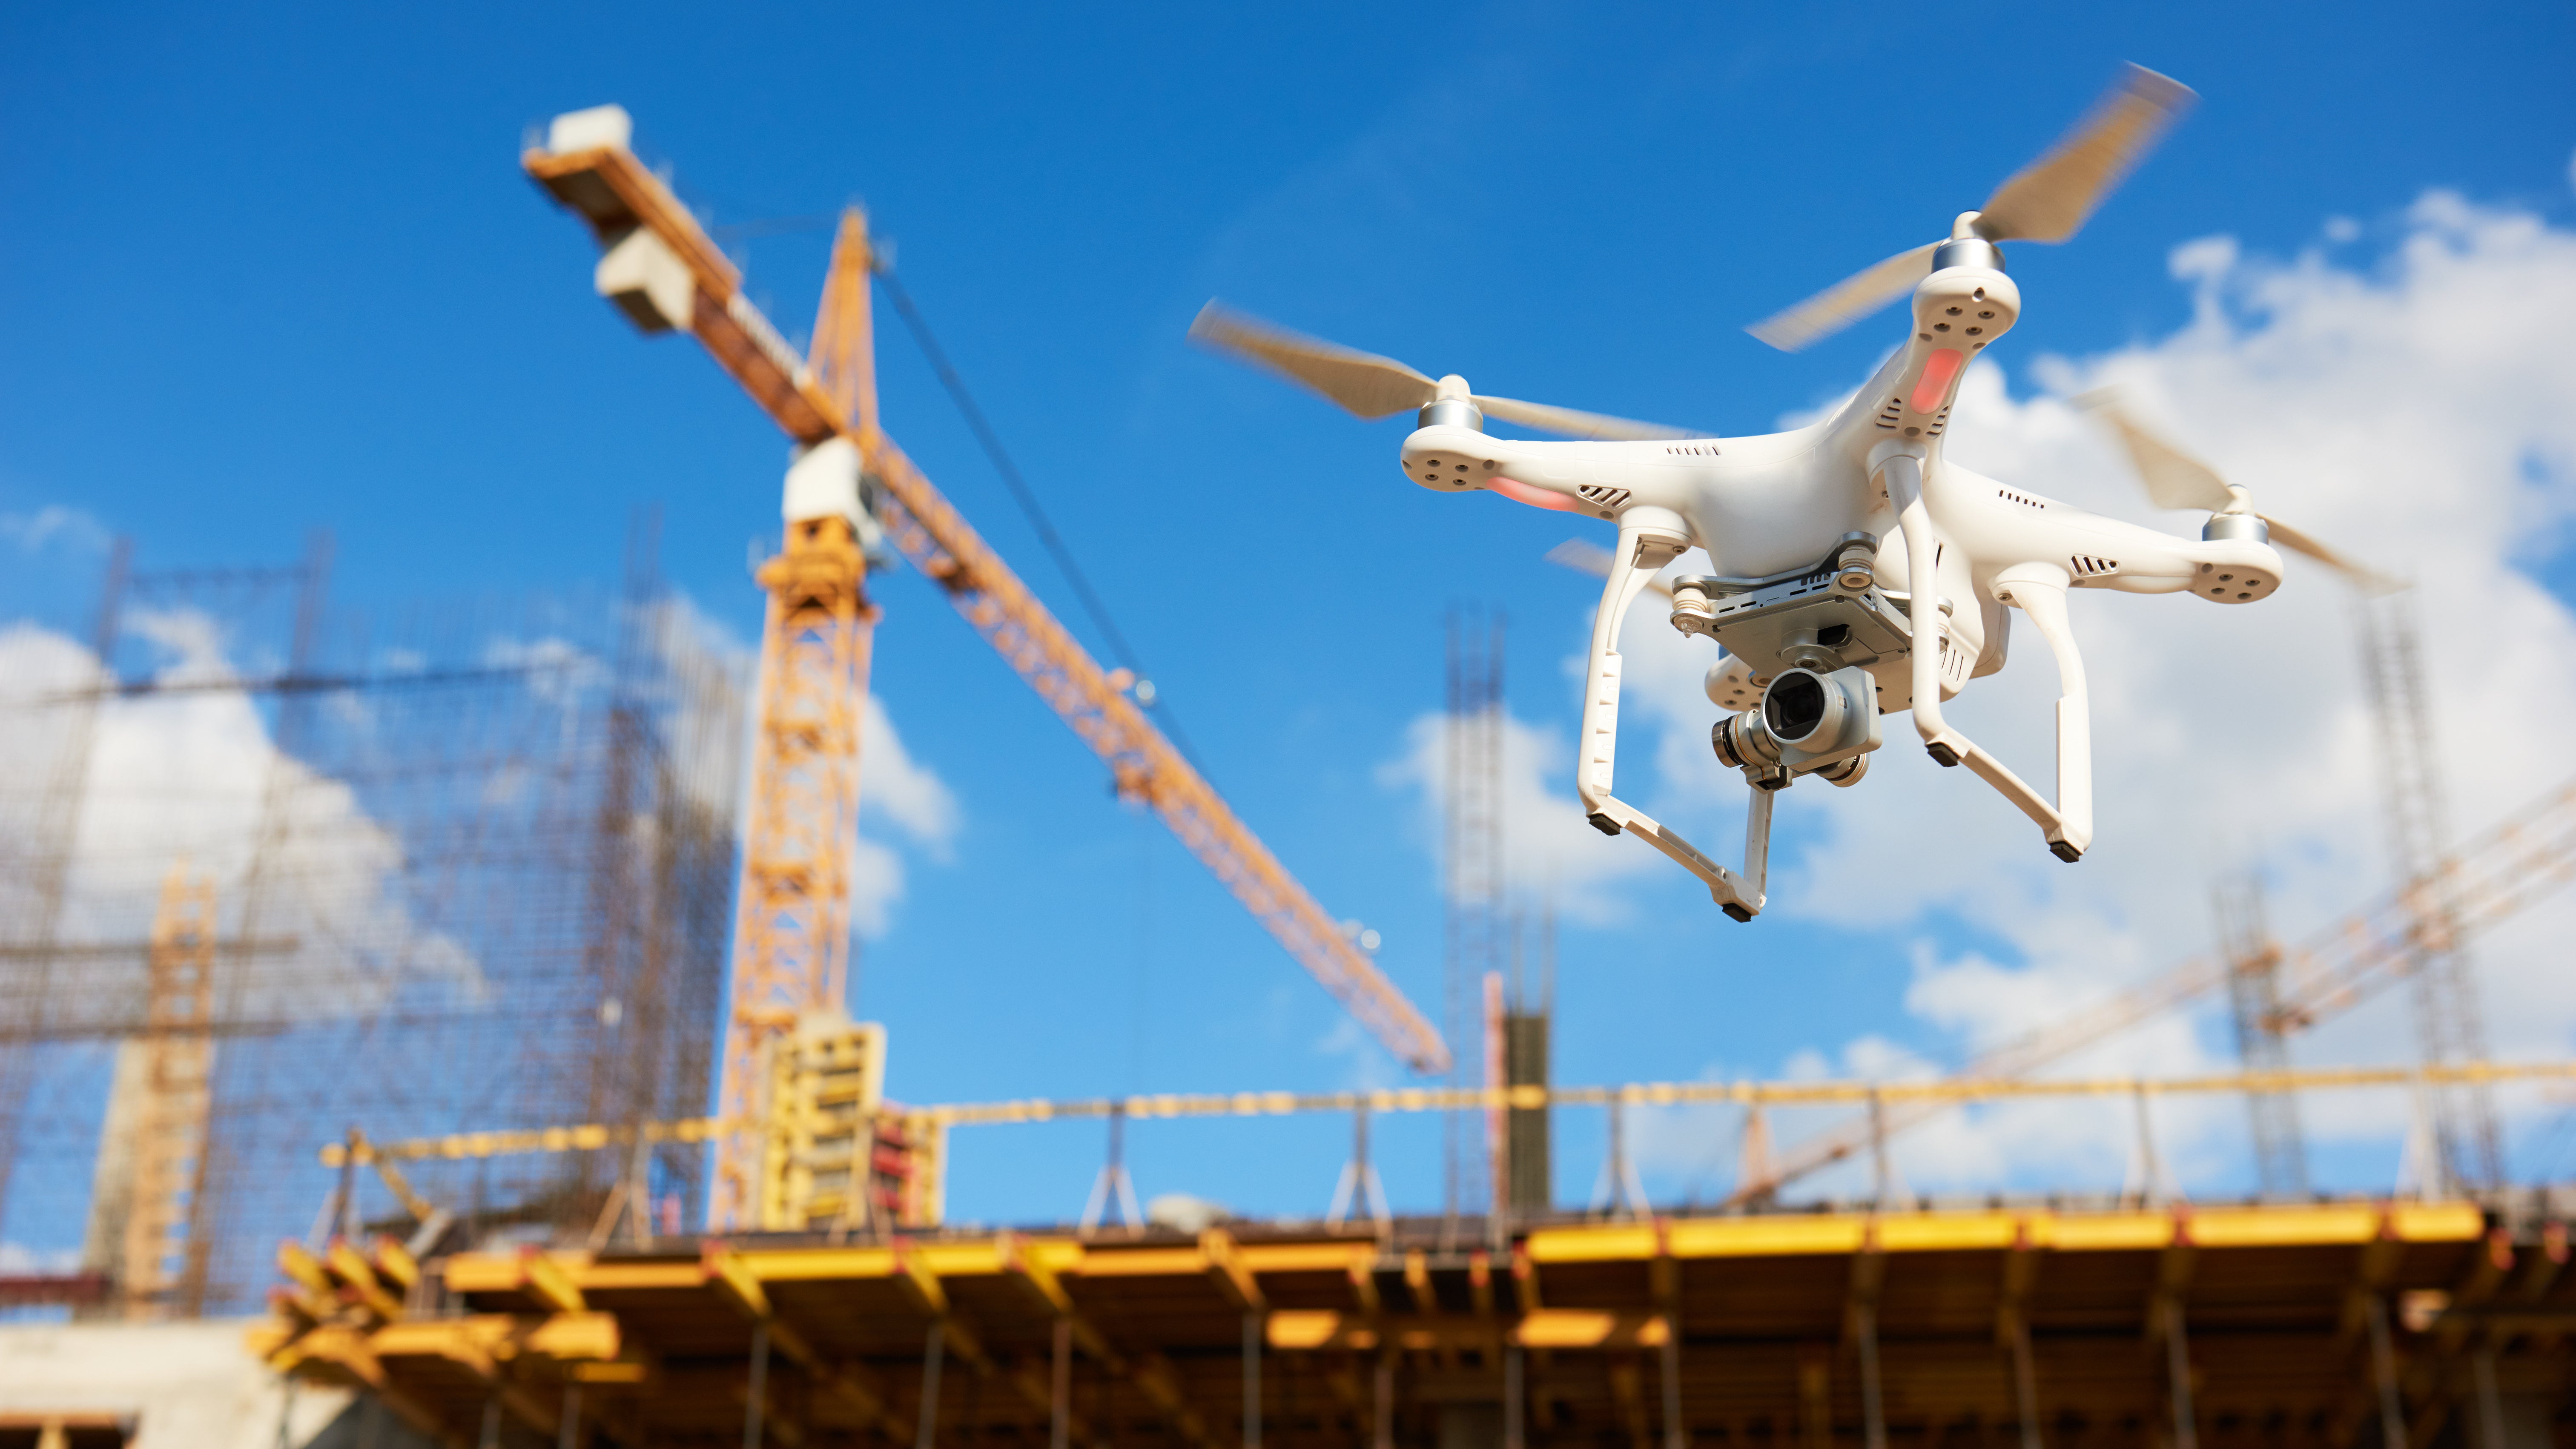 Digital Trands in the Construction Industry